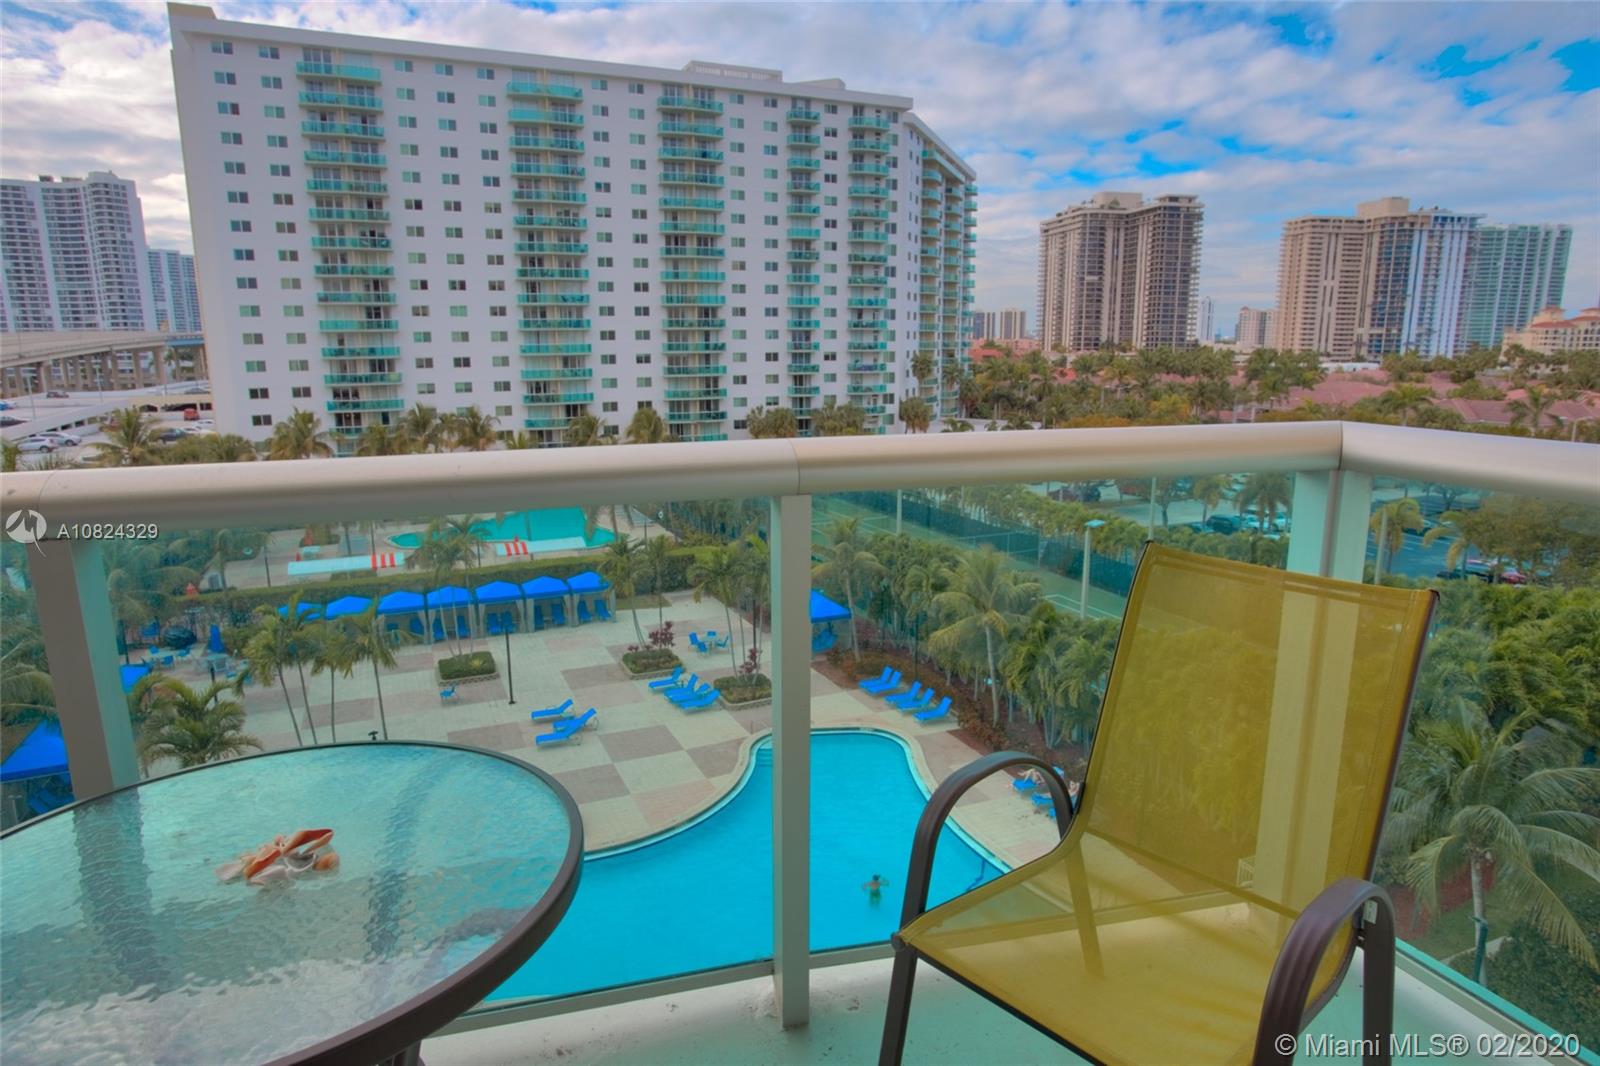 OCEAN RESERVE, Sunny Isles Beach TOP Condos for Sale in